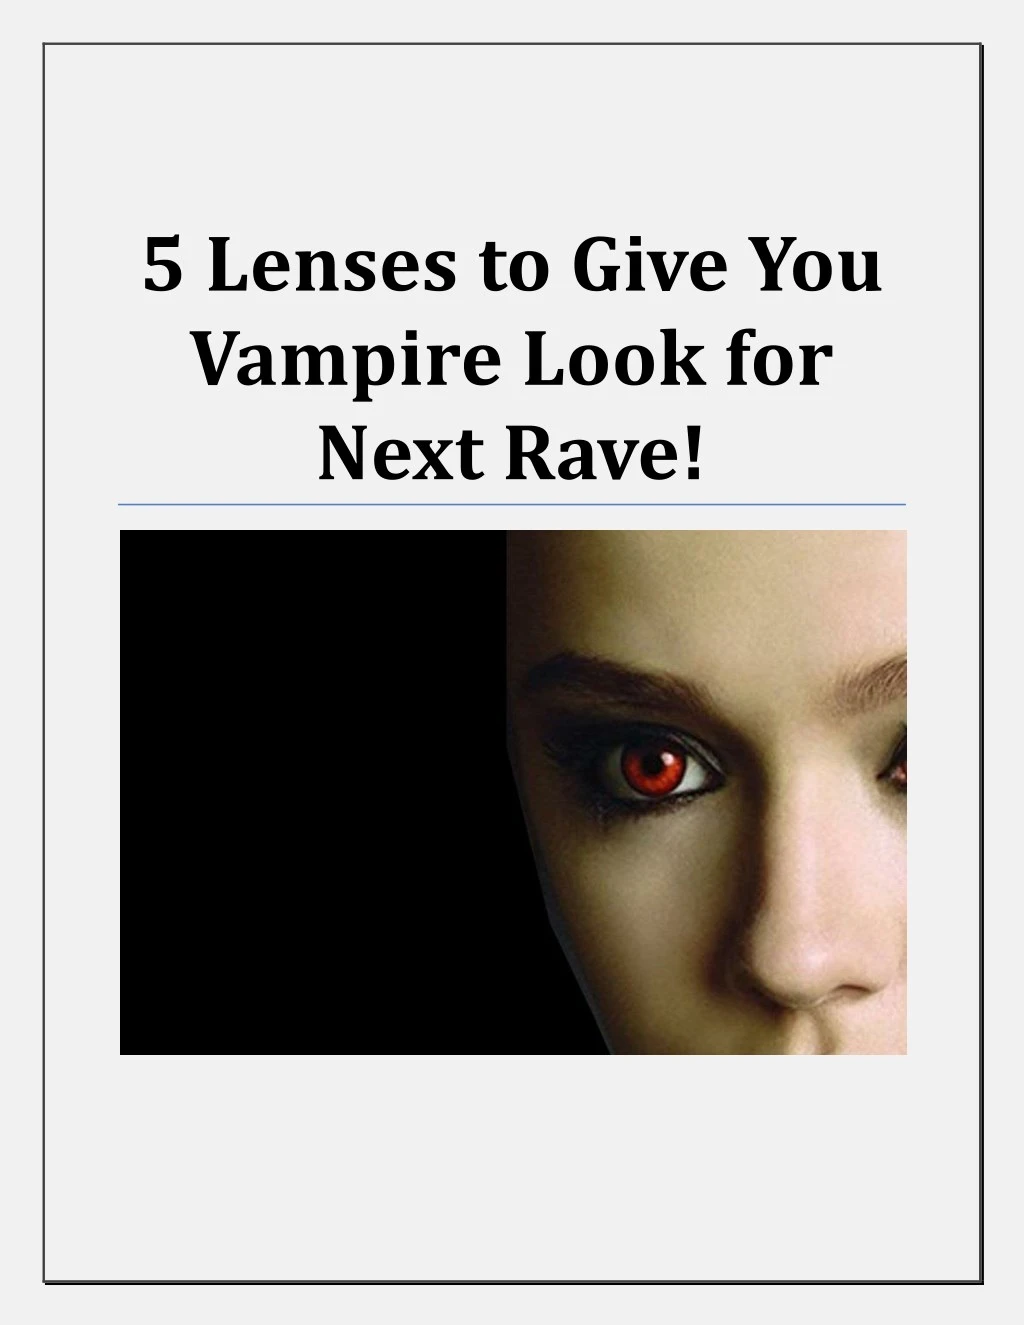 5 lenses to give you vampire look for next rave